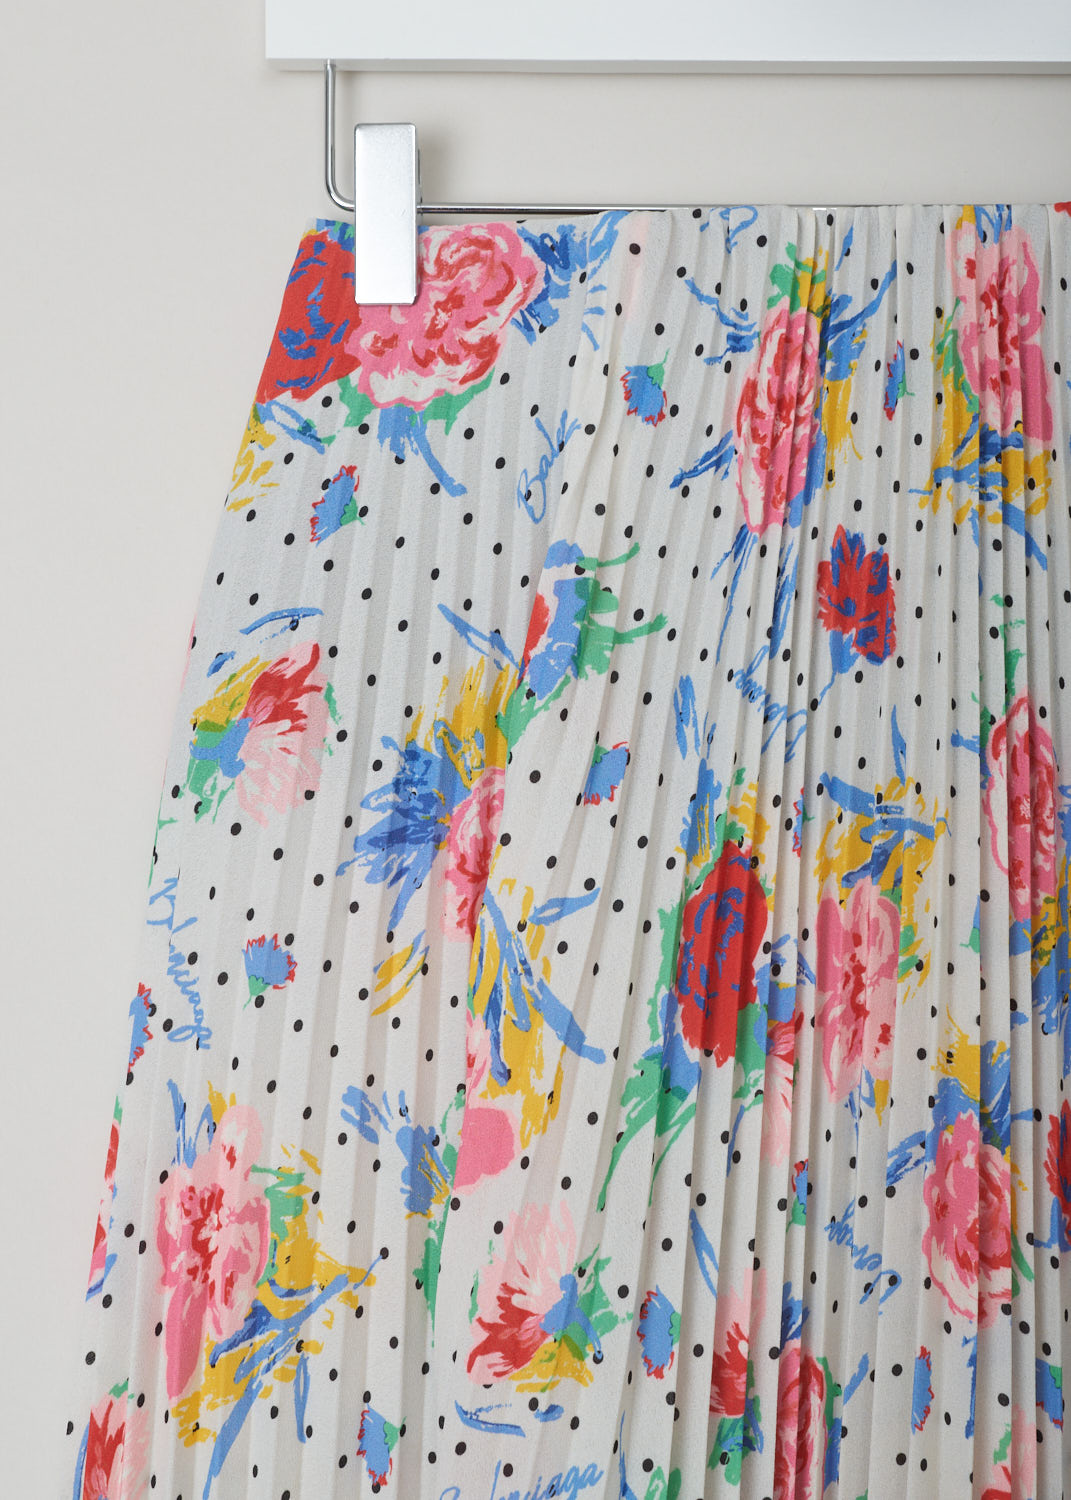 Balenciaga, Polka dot floral plissÃ© skirt, 601169_THL07_9701, white red yellow green blue, detail. This high-waisted multi-colored plissÃ© skirt comes with a floral design pattern and polka dots through-out. The closure options on this piece are 2 metal hooks and beneath that a concealed zipper.